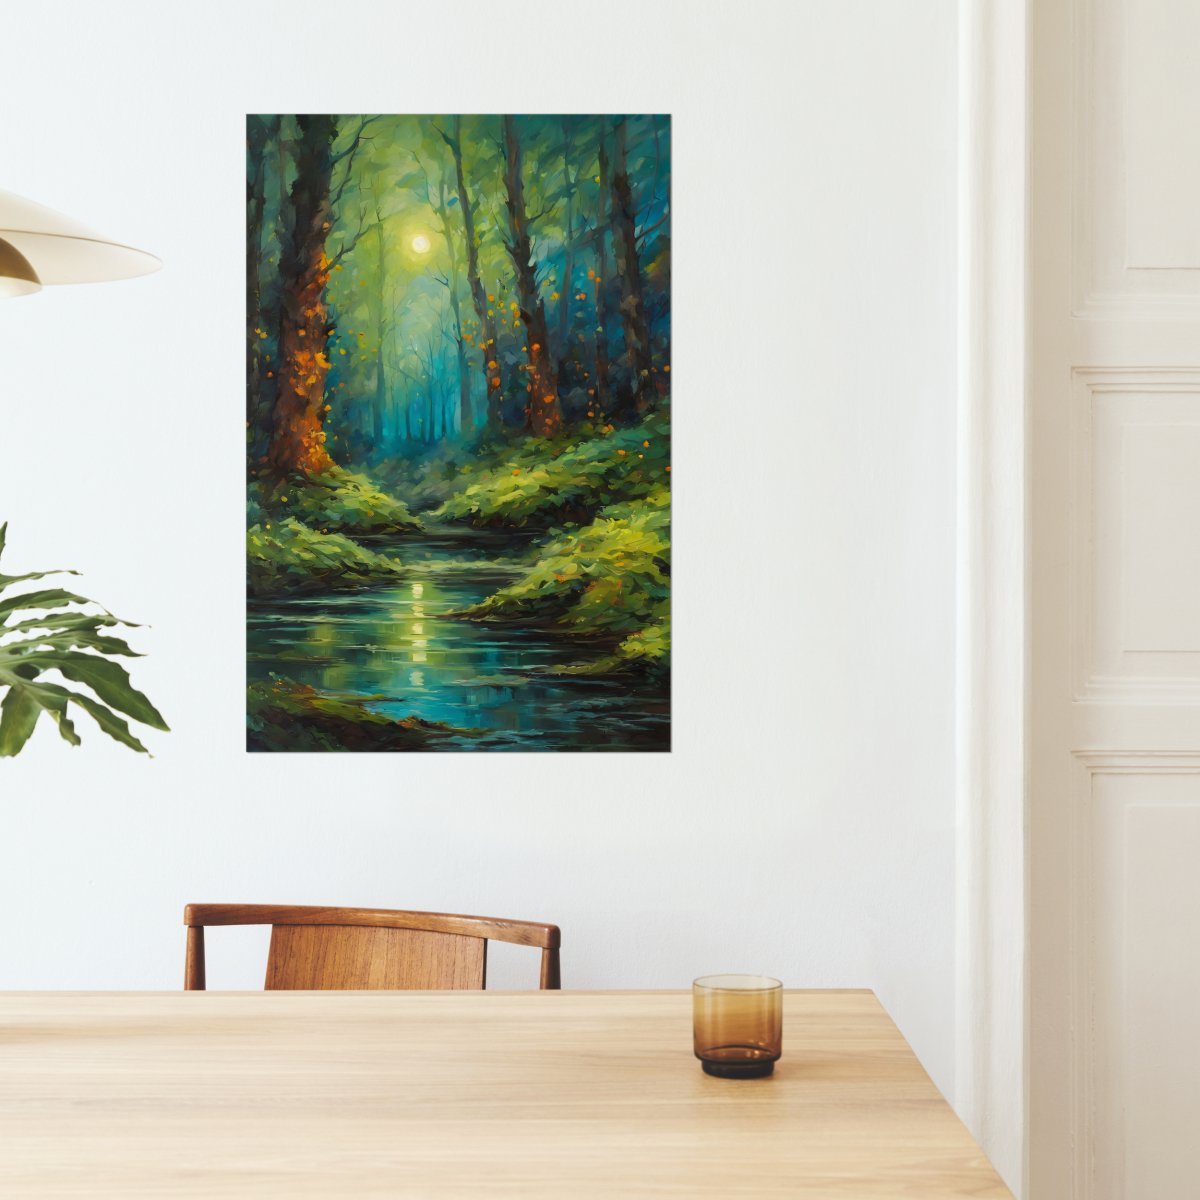 Foggy evergreen night - Art print - Poster - Ever colorful